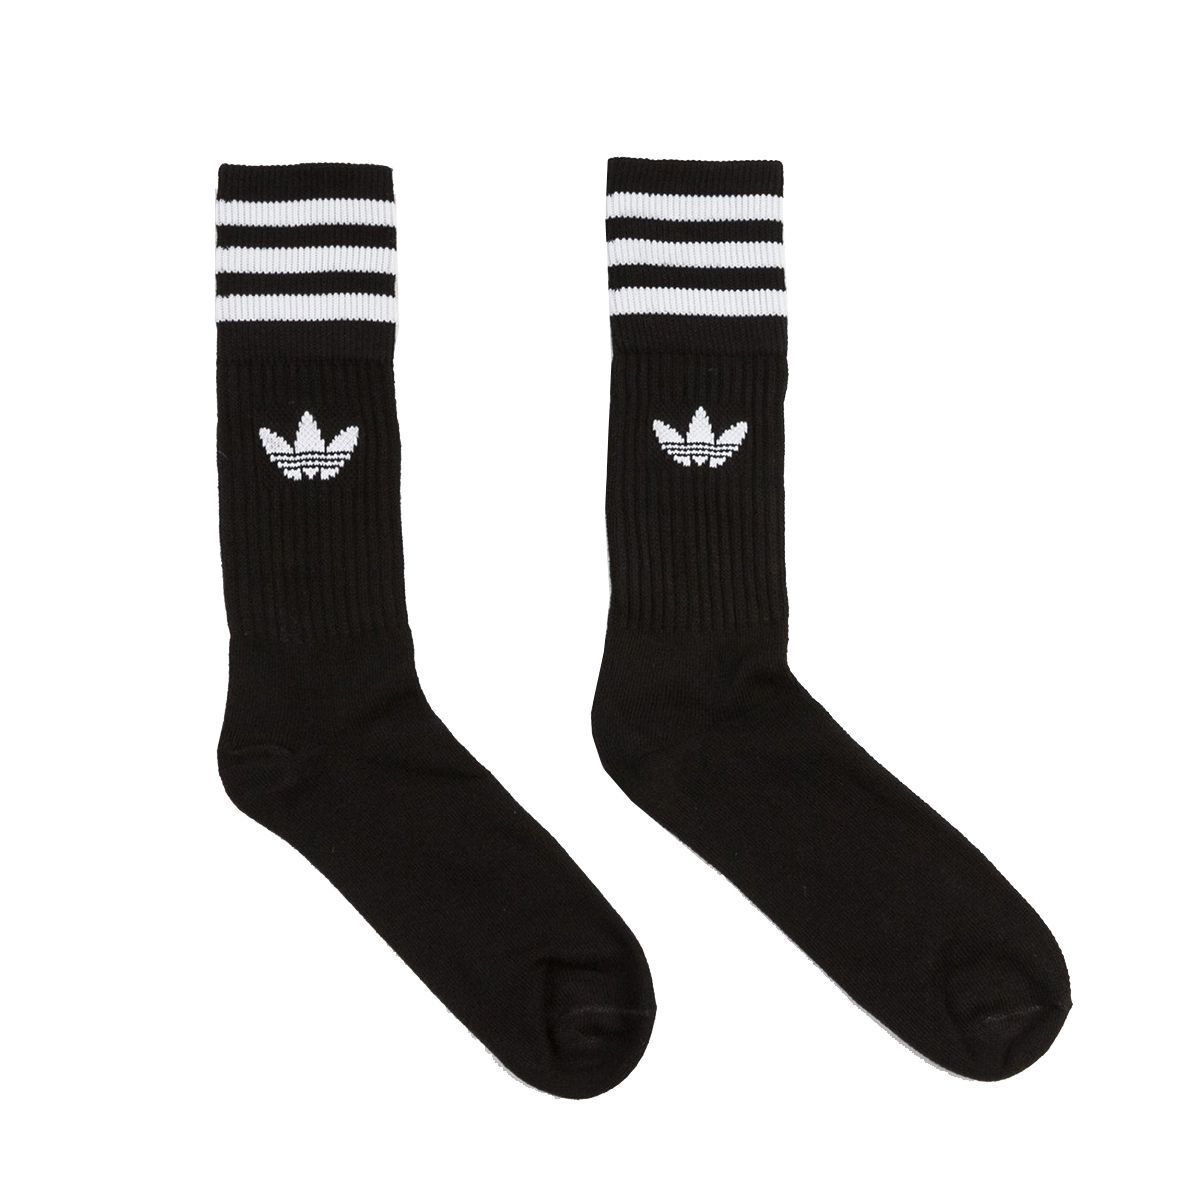 chaussette montante adidas